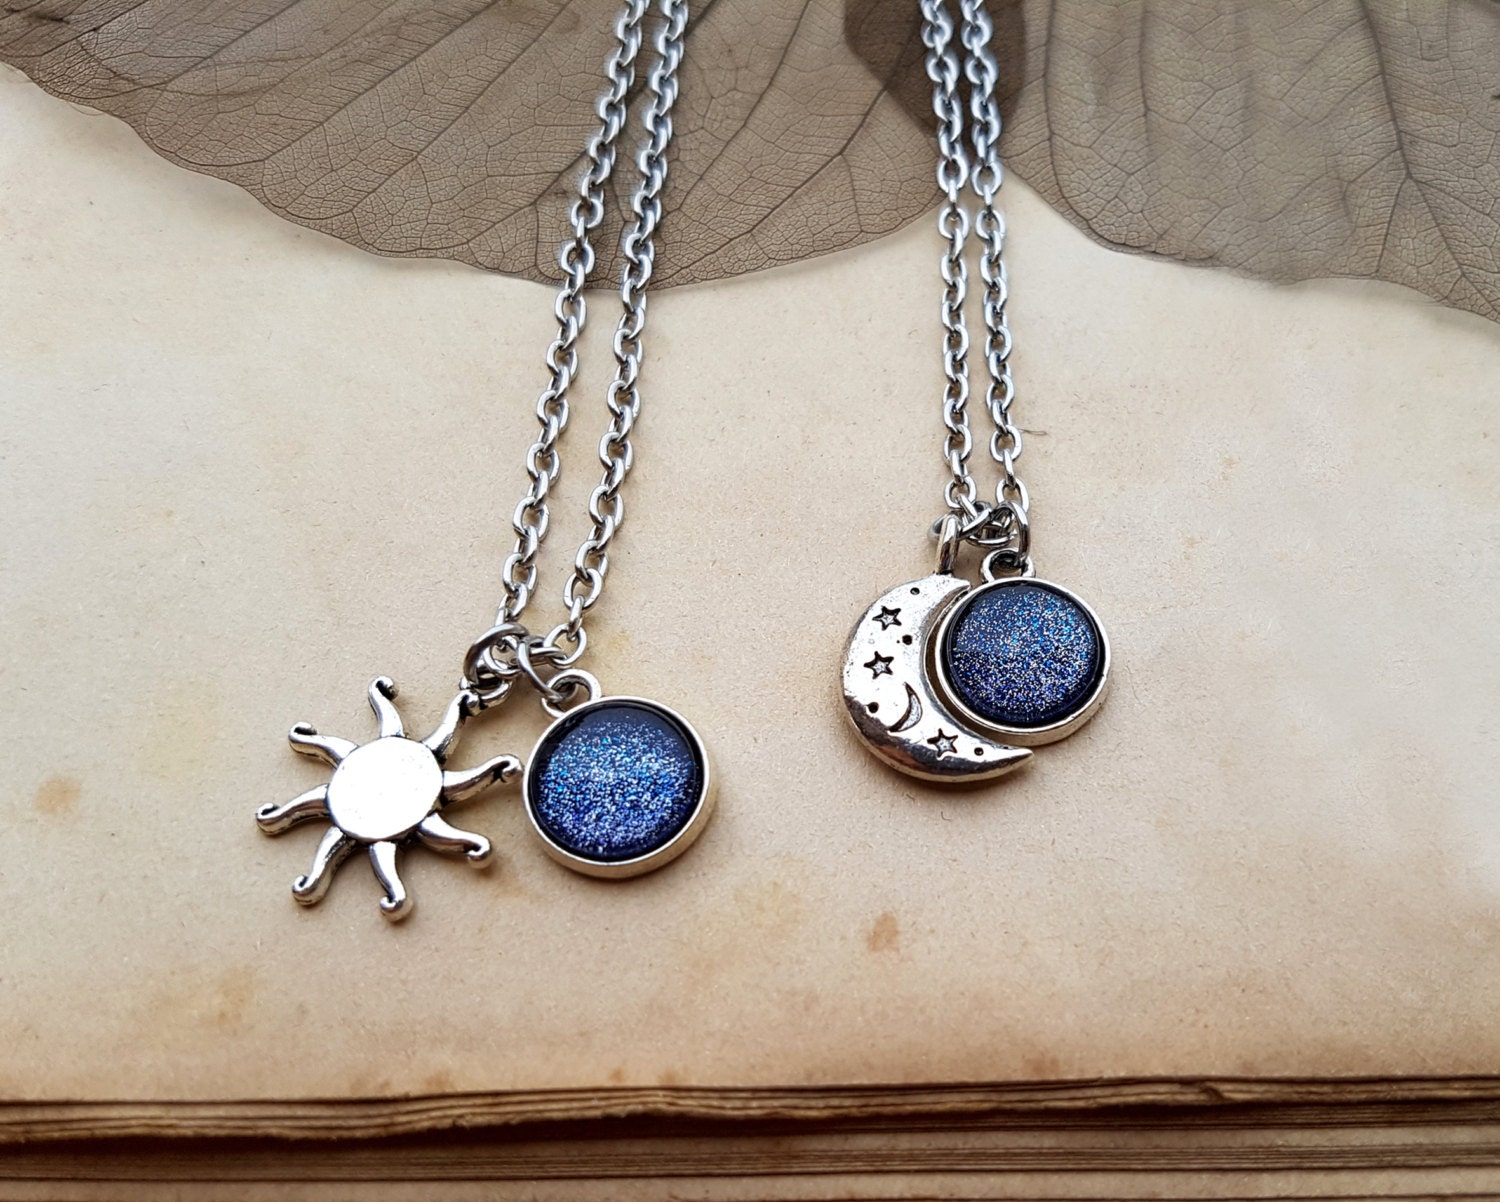 2 Sun And Moon Necklaces Best Friends Jewelry Friendship 